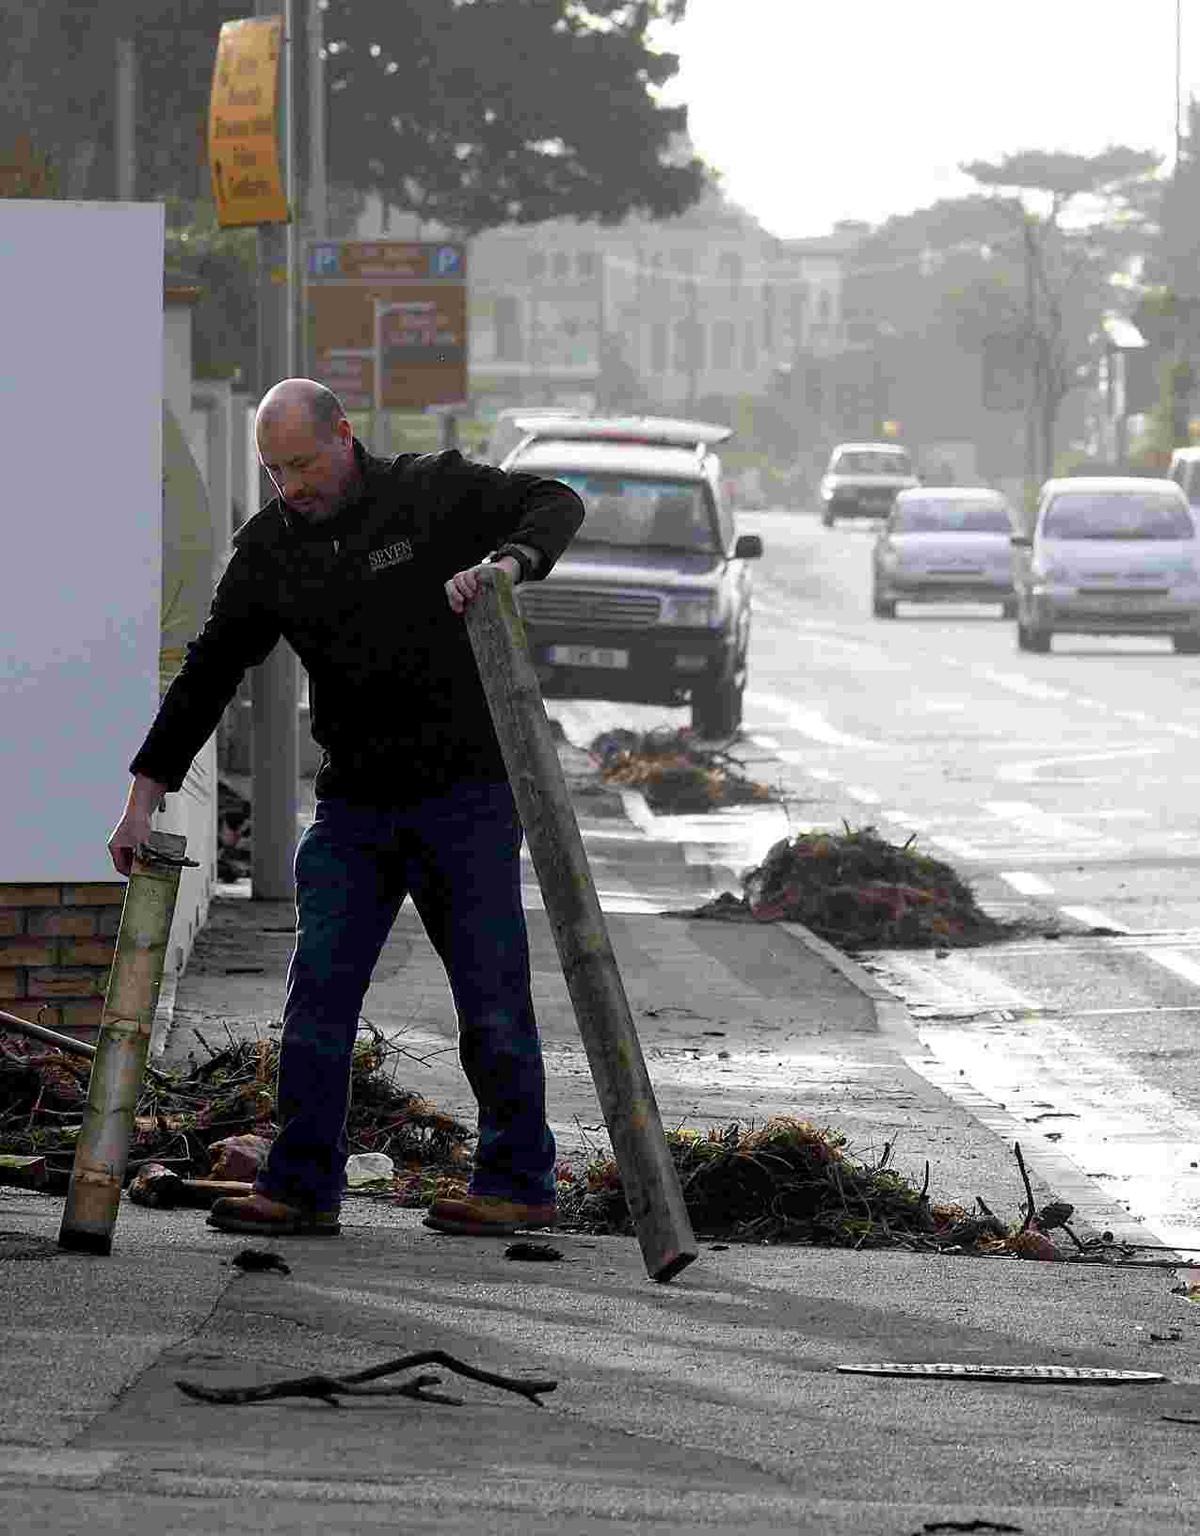 Daily Echo photos of the storms on February 14 and 15th and the trail of devastation left in its wake.  